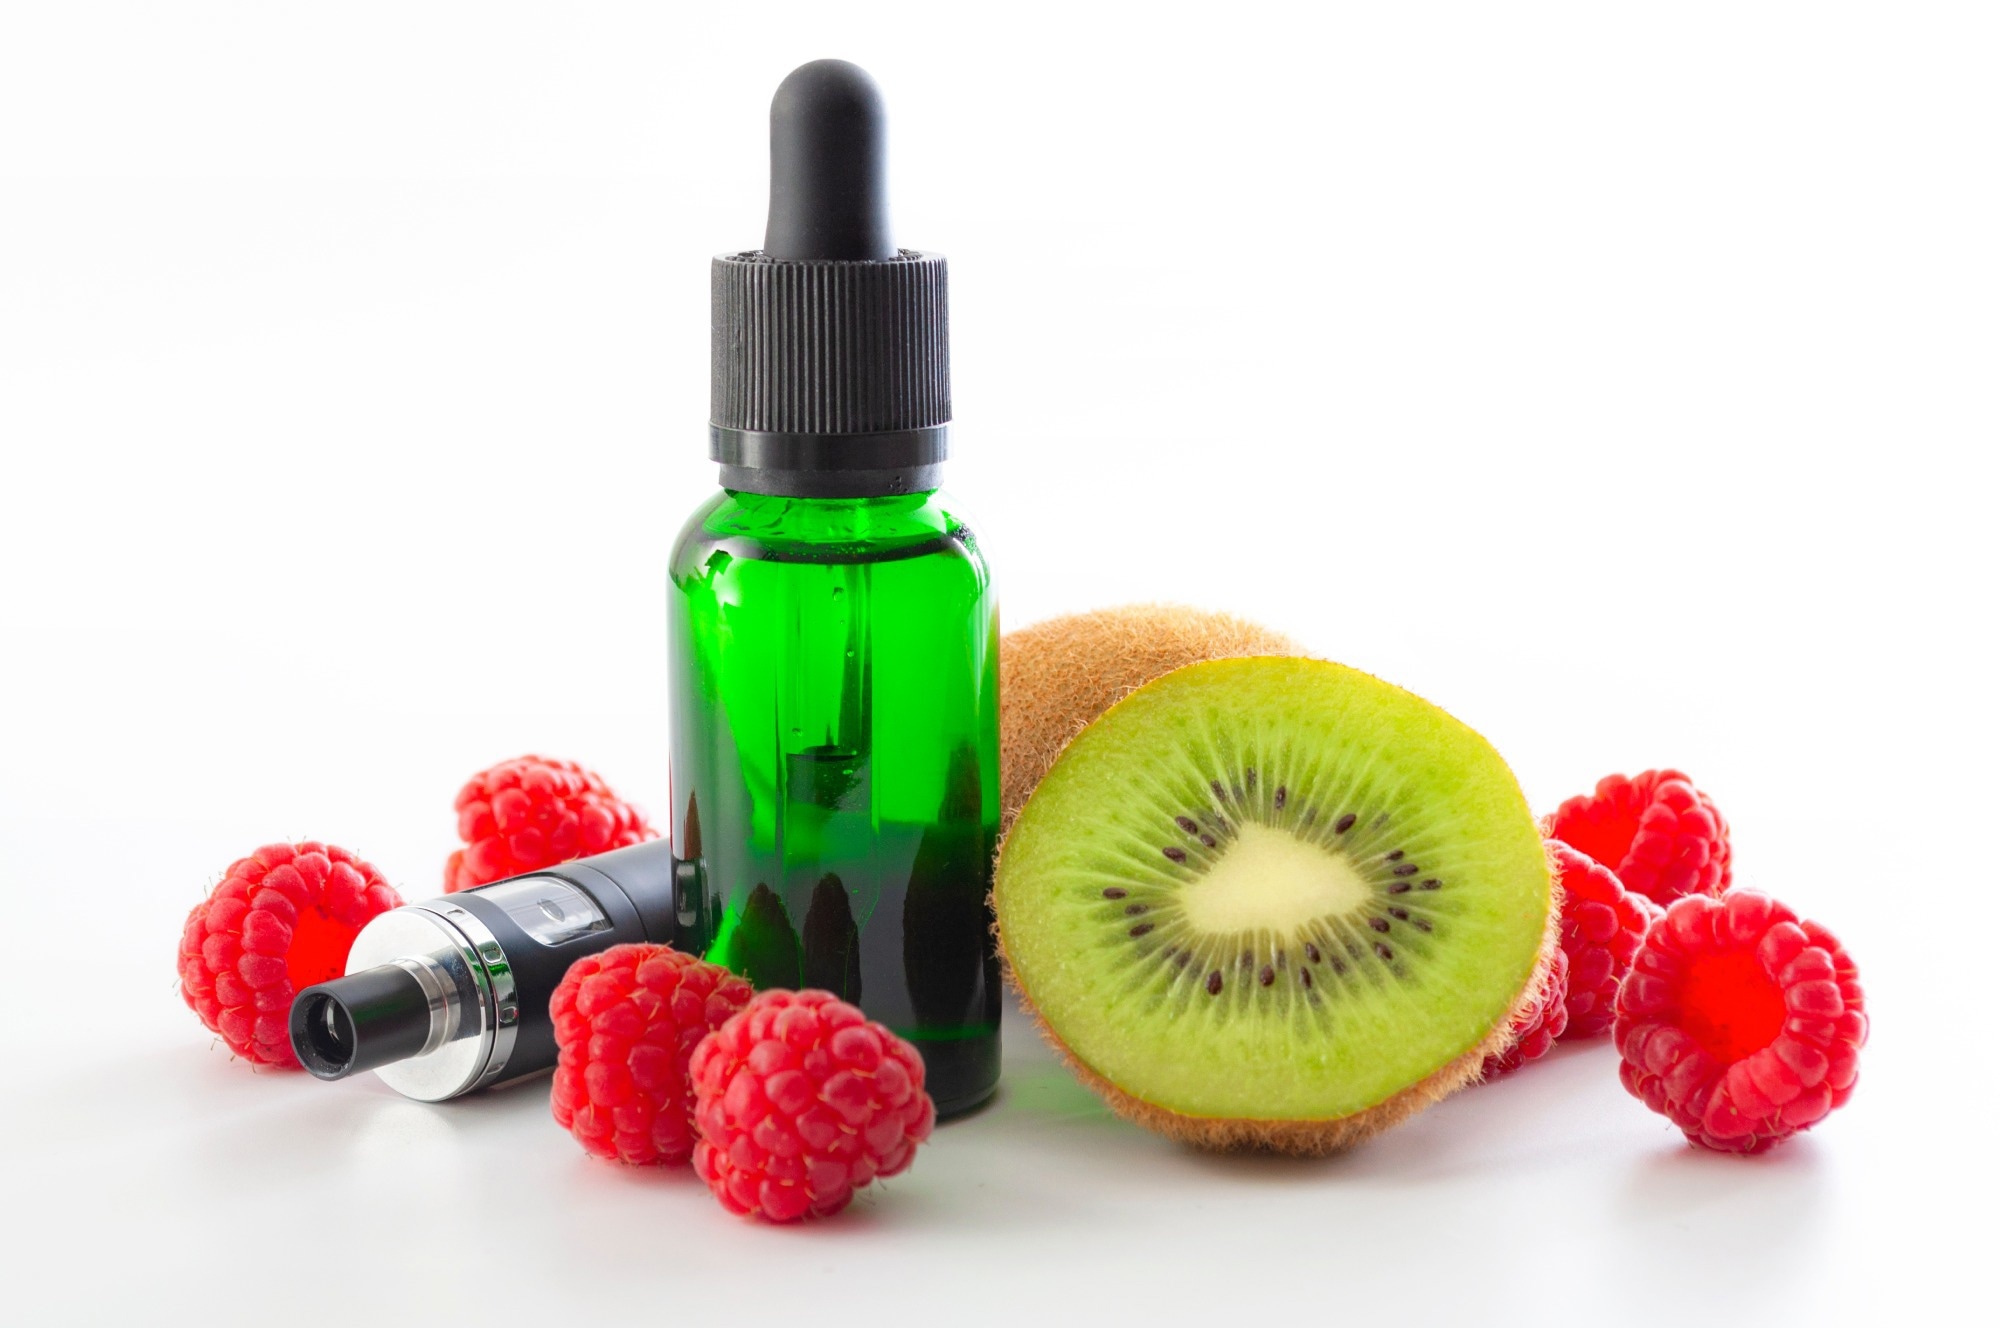 The Role of Flavored Electronic Nicotine Delivery Systems in Smoking Cessation: A Systematic Review. Image Credit: Victor Moussa / Shutterstock